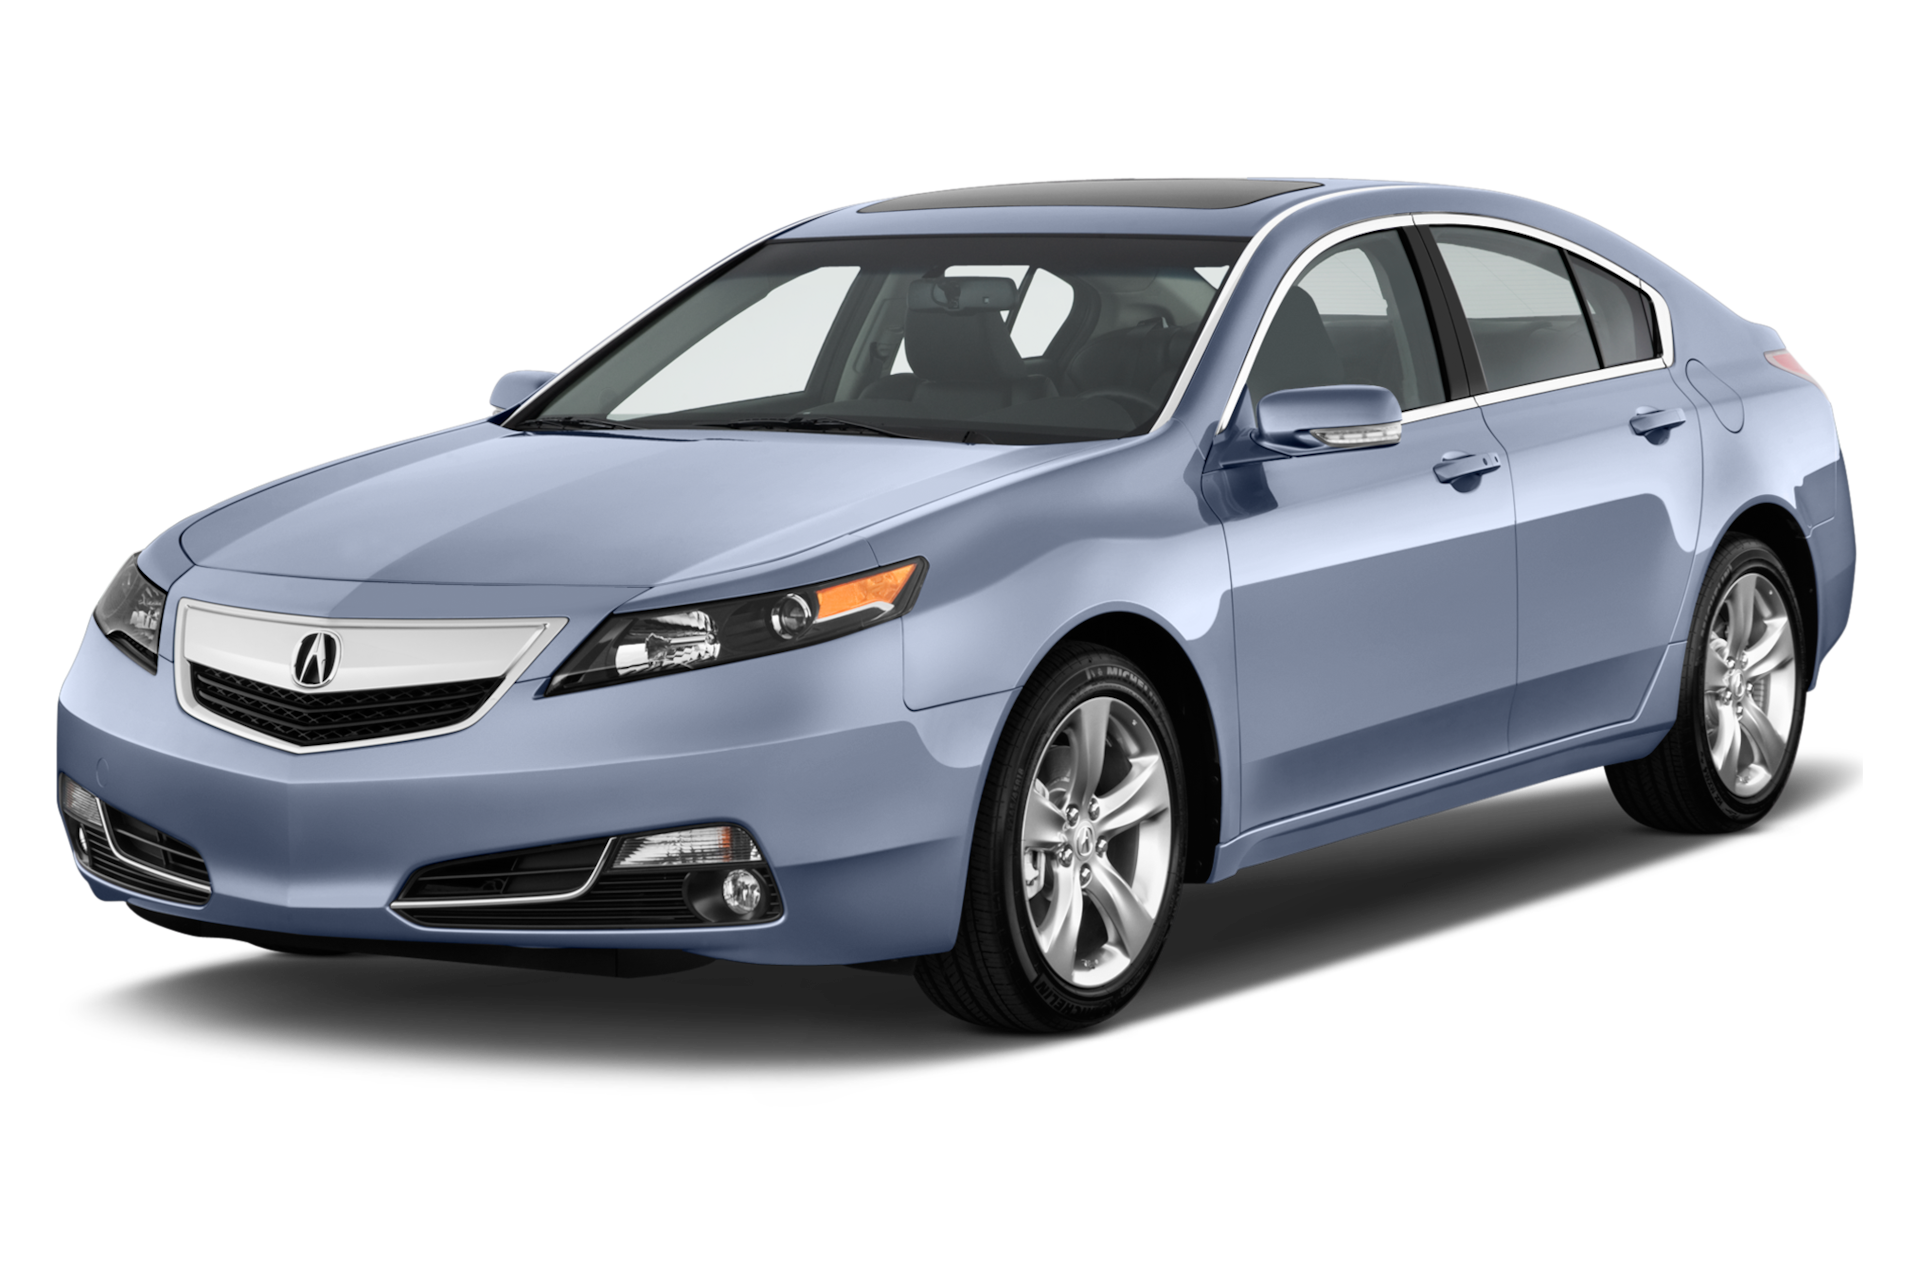 2012 Acura TL Prices, Reviews, and Photos - MotorTrend